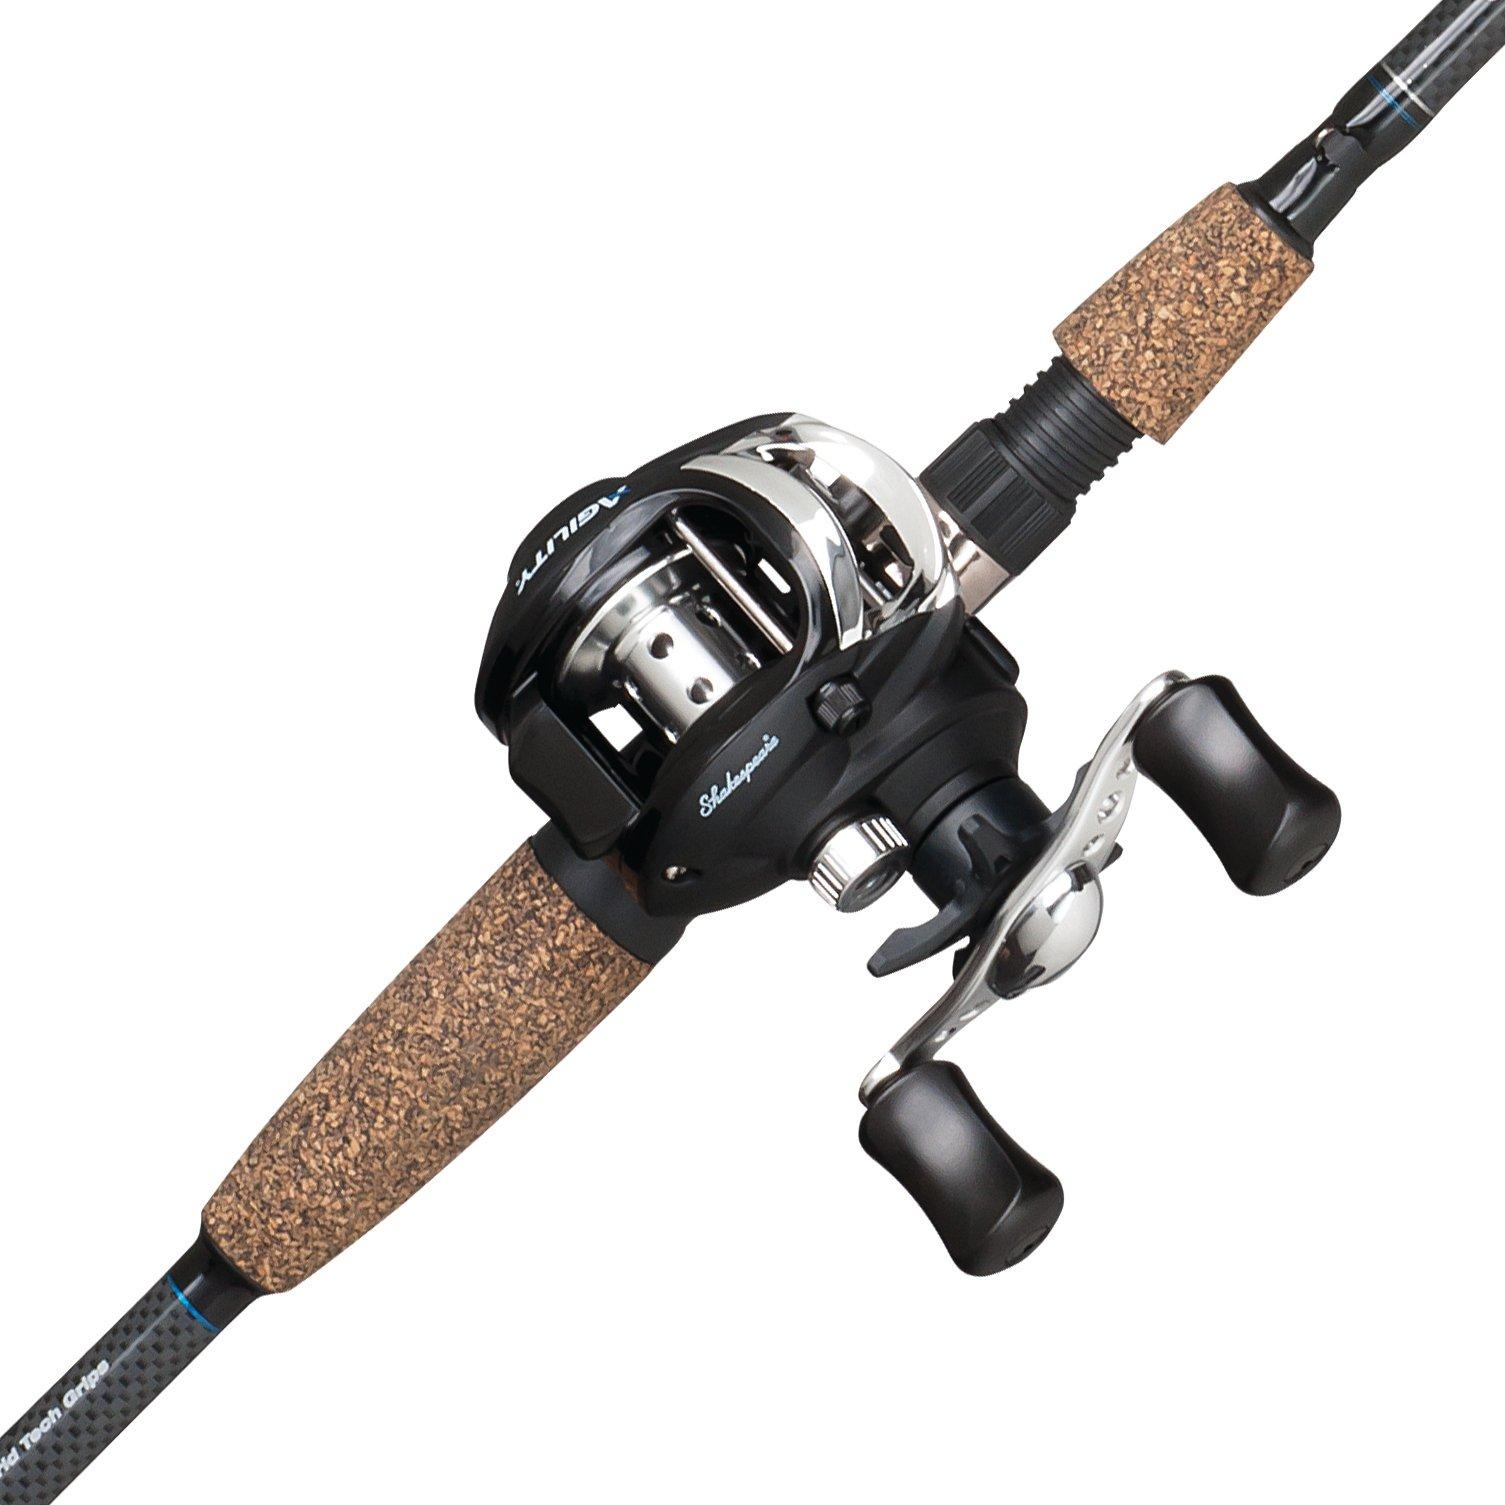 2 speeds spinning reels and 2 speeds baitrunner reels - Fishing tackle  manufacturer. Osprey fishing rod and fishing reel. Rod-spinning, casting,  trolling and jigging. Reel: spinning and casting. Fishing lures from soft